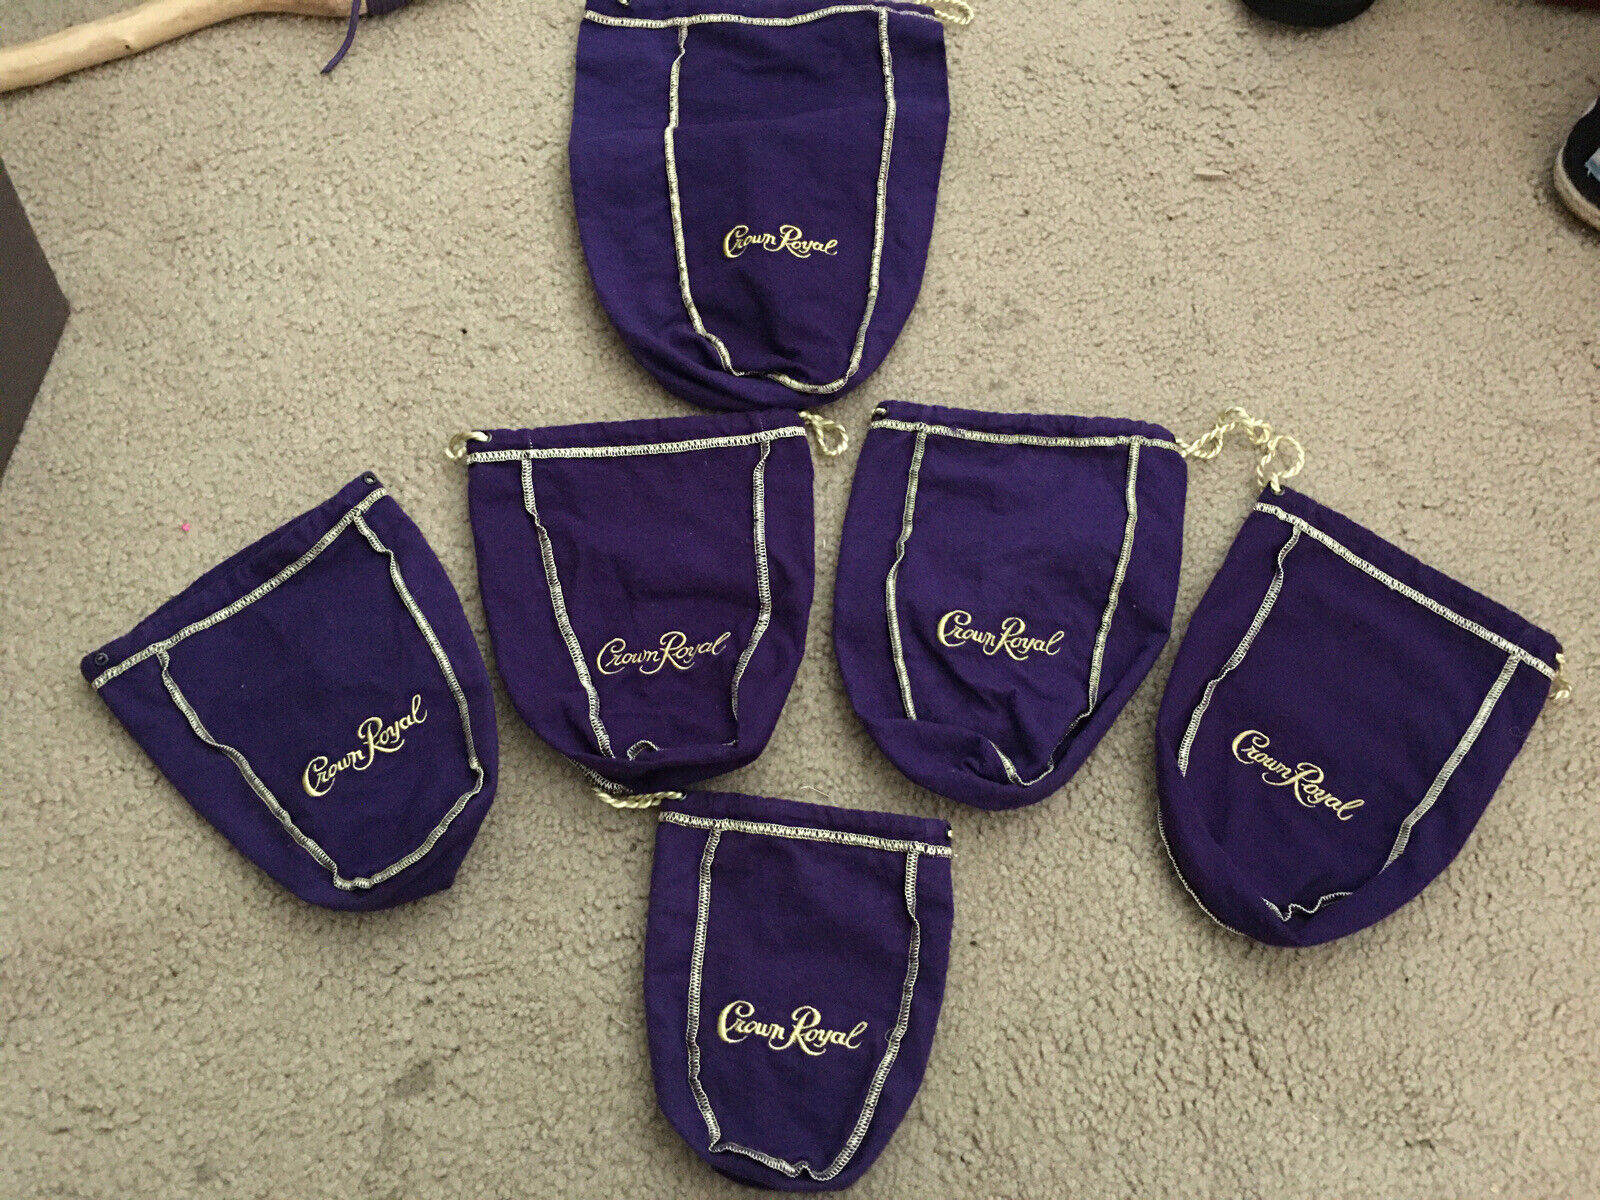 LOT OF 6 CROWN ROYAL BAGS Various Sizes - Great for Crafts and Projects